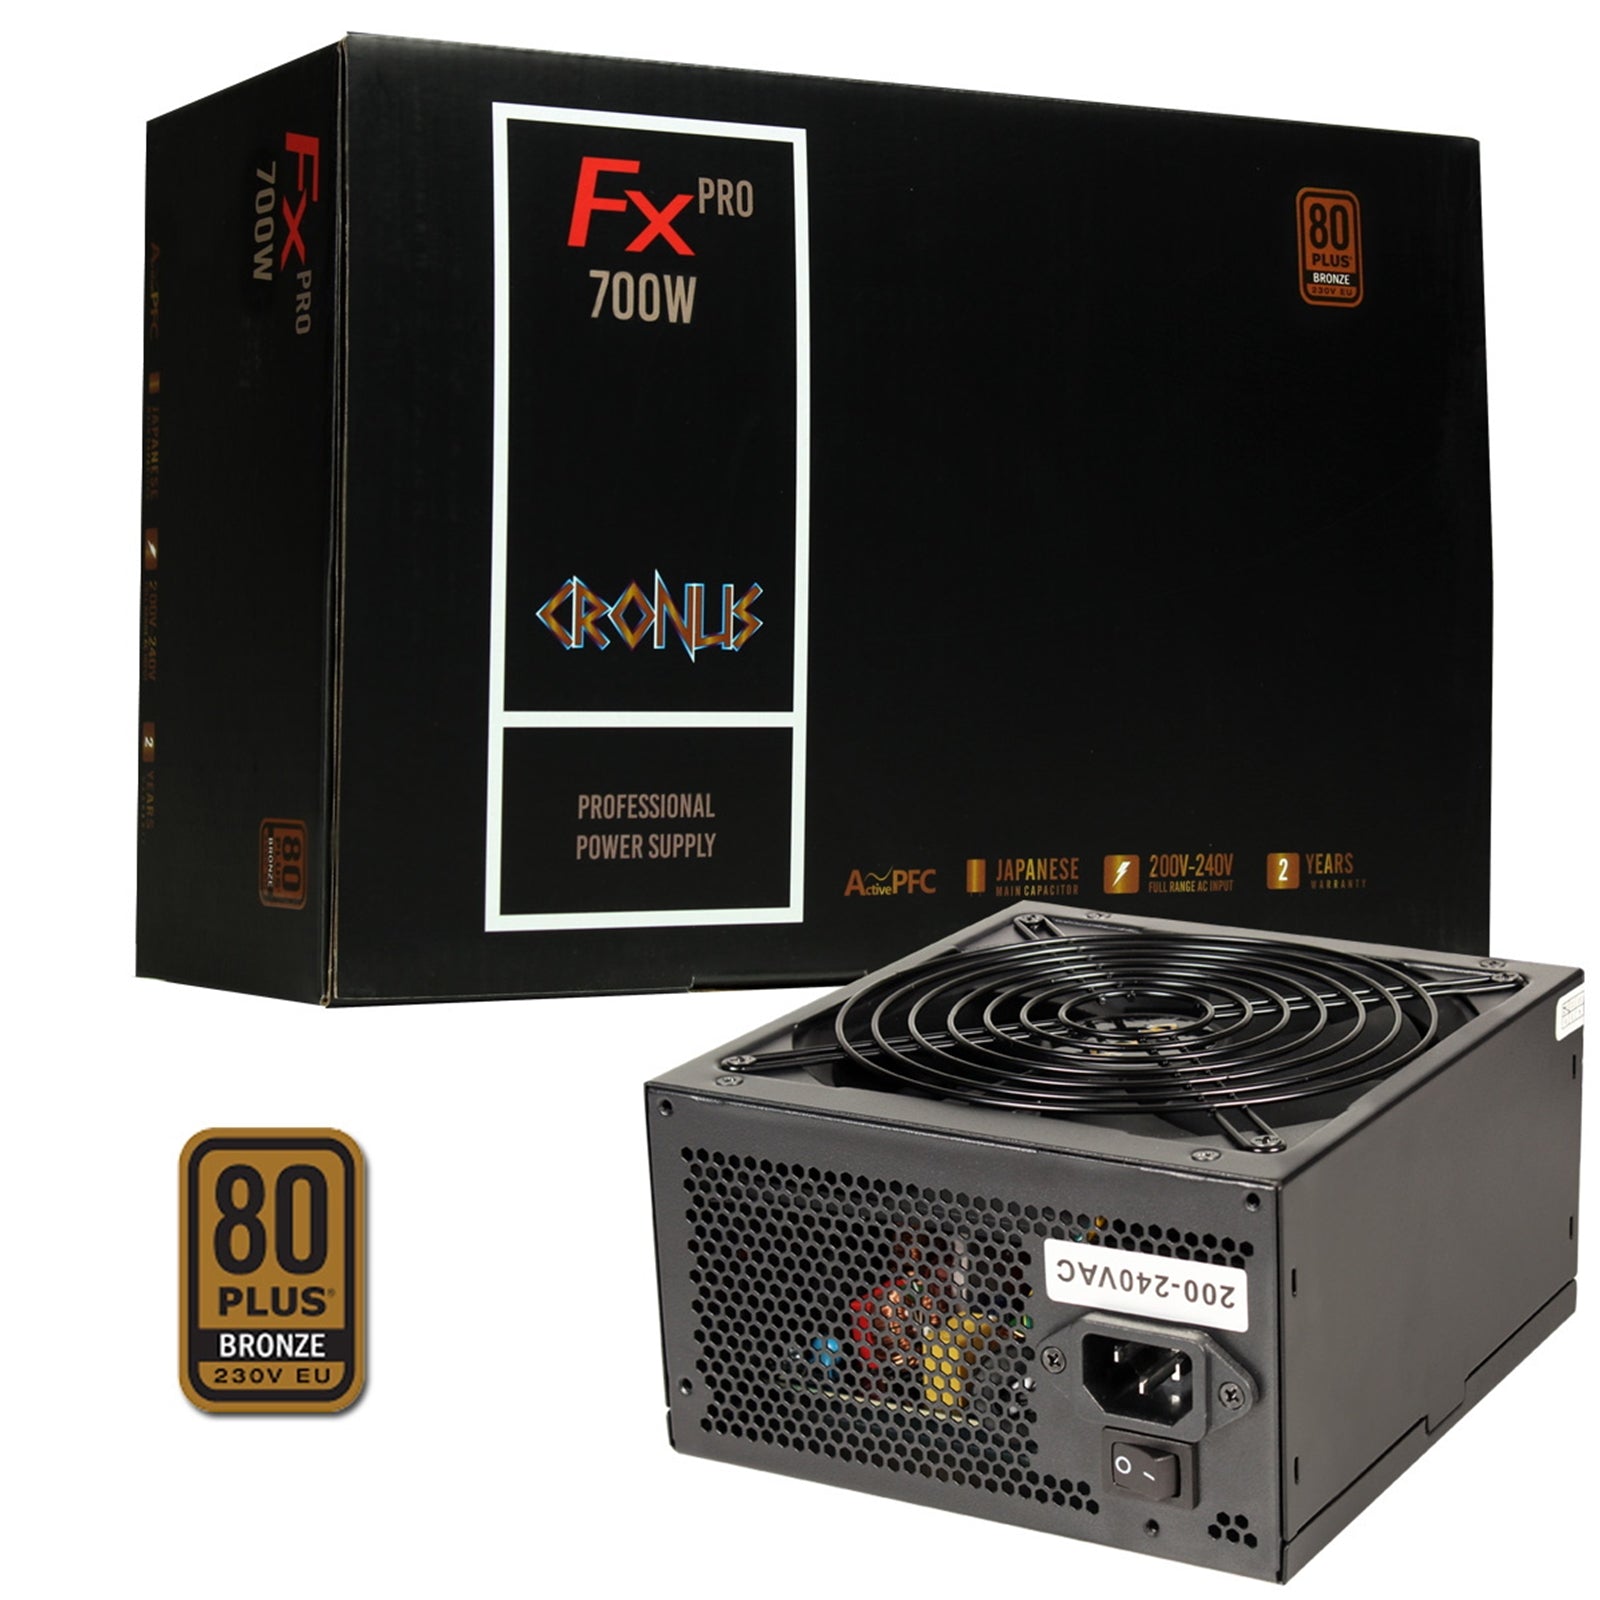 CRONUS FX Pro 700W Power Supply Supreme Gaming Performance with Silent Cooling